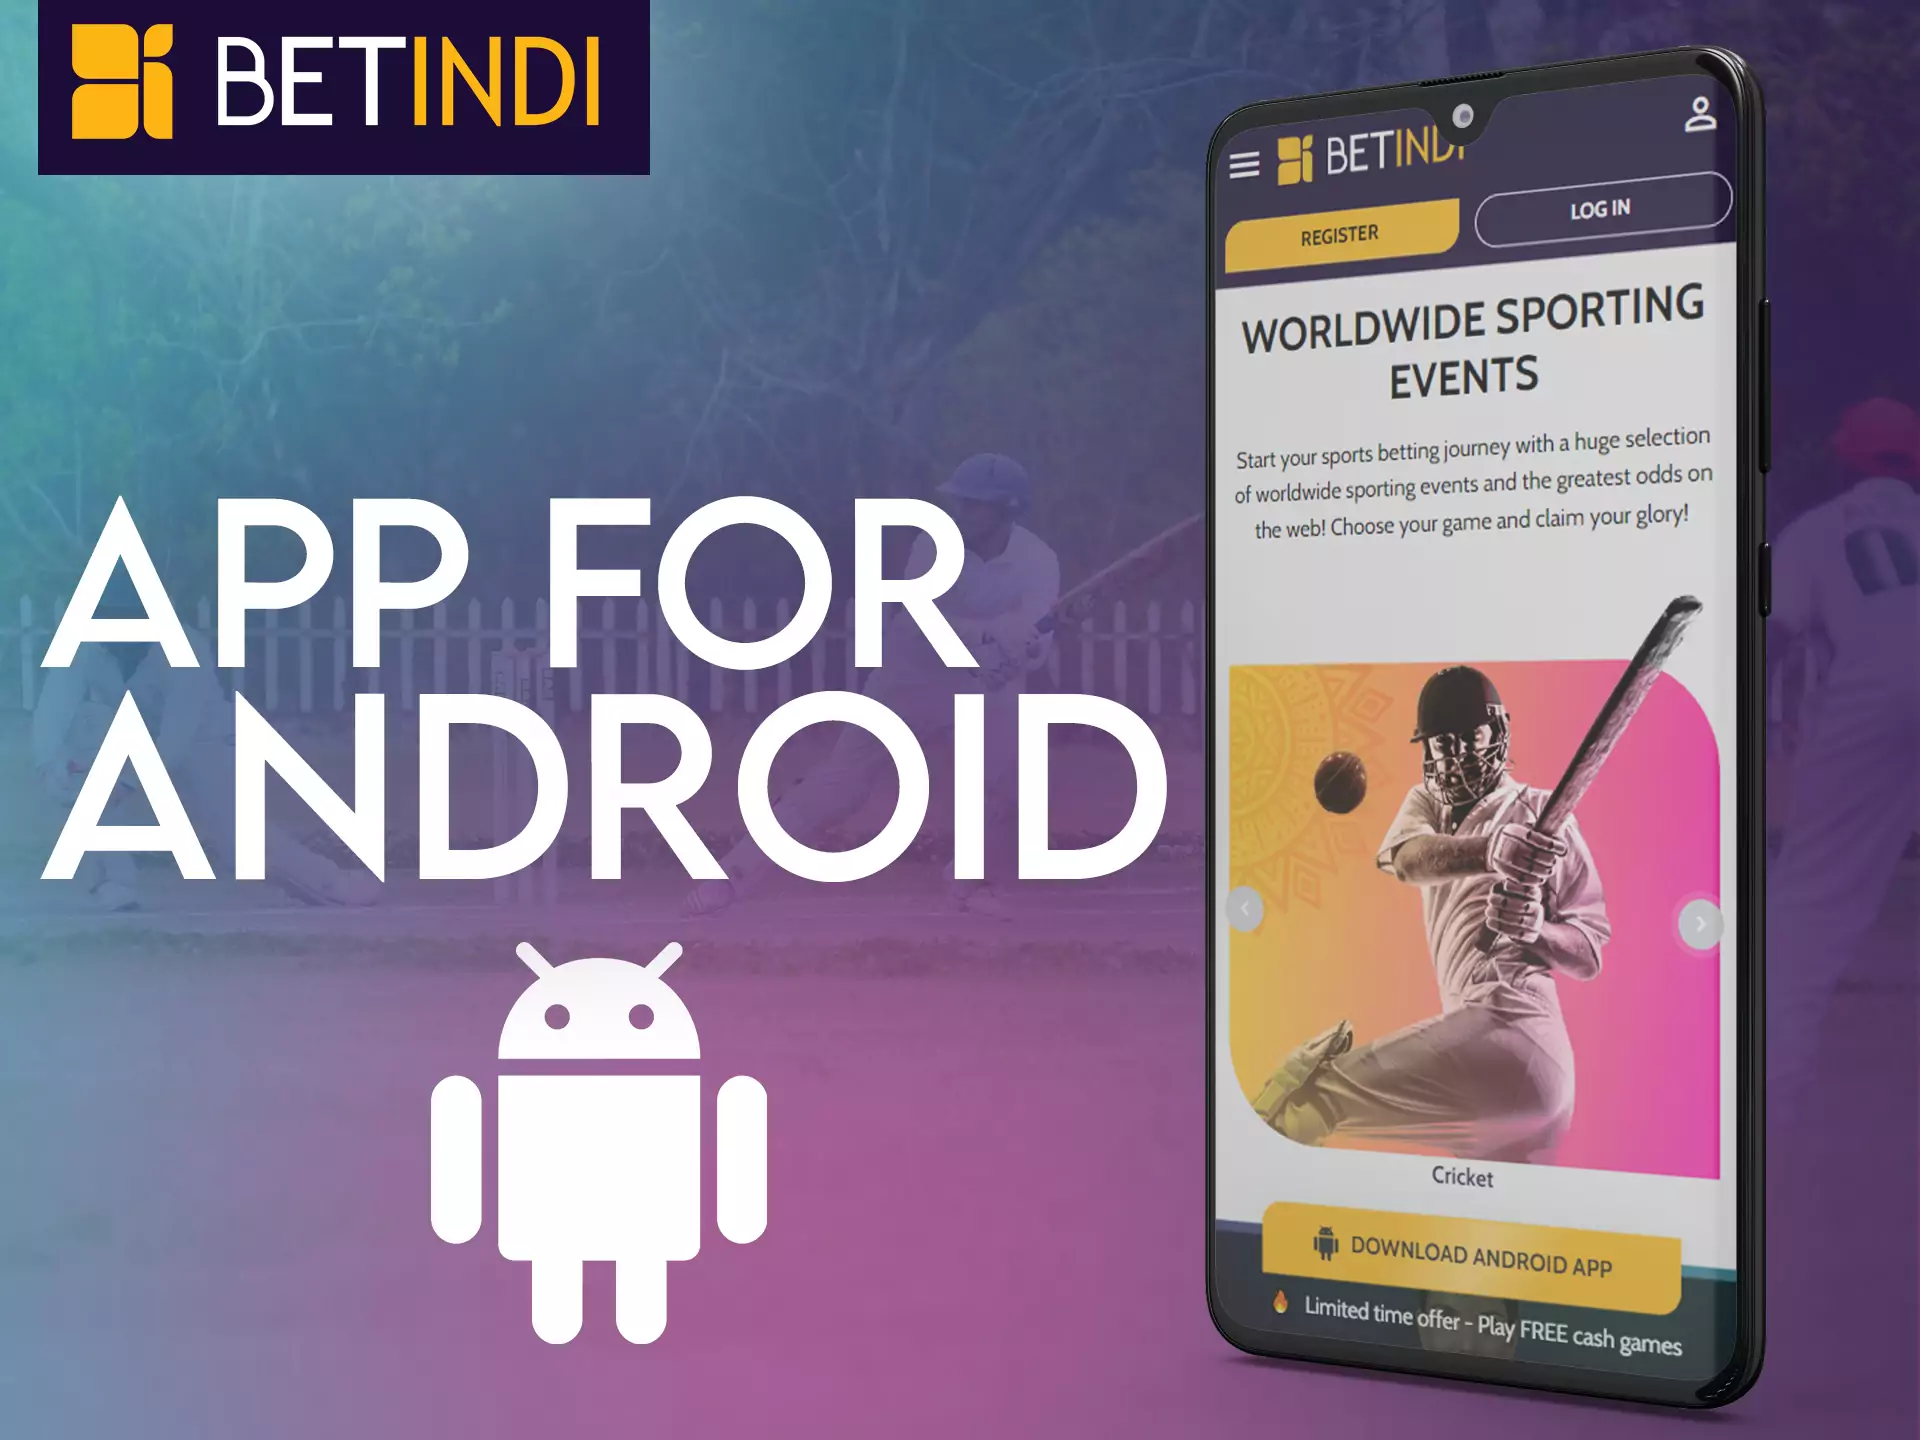 Install the Betindi app for an Android device.